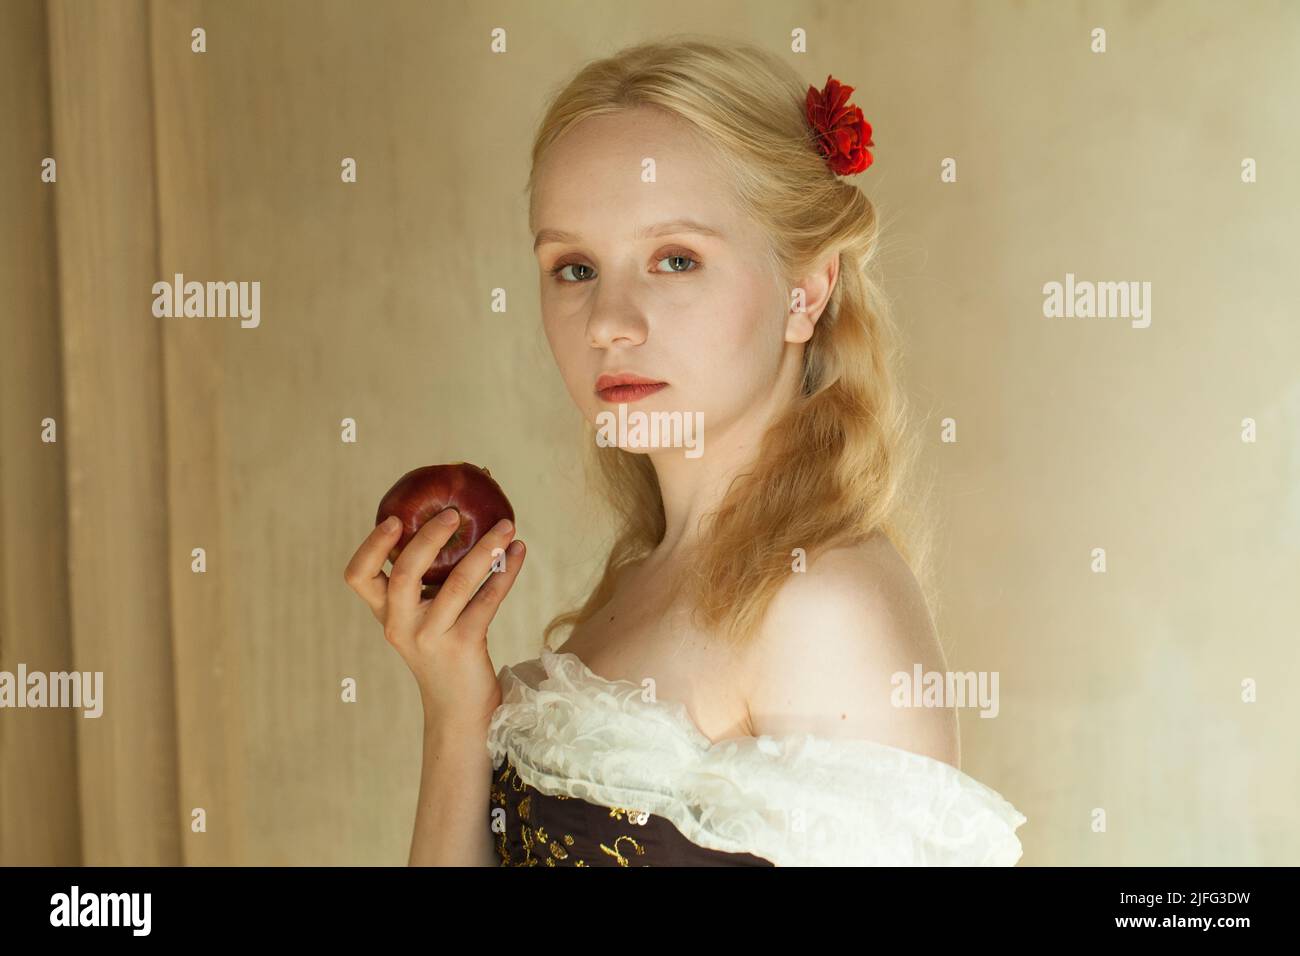 Romantic vintage woman with red apple Stock Photo